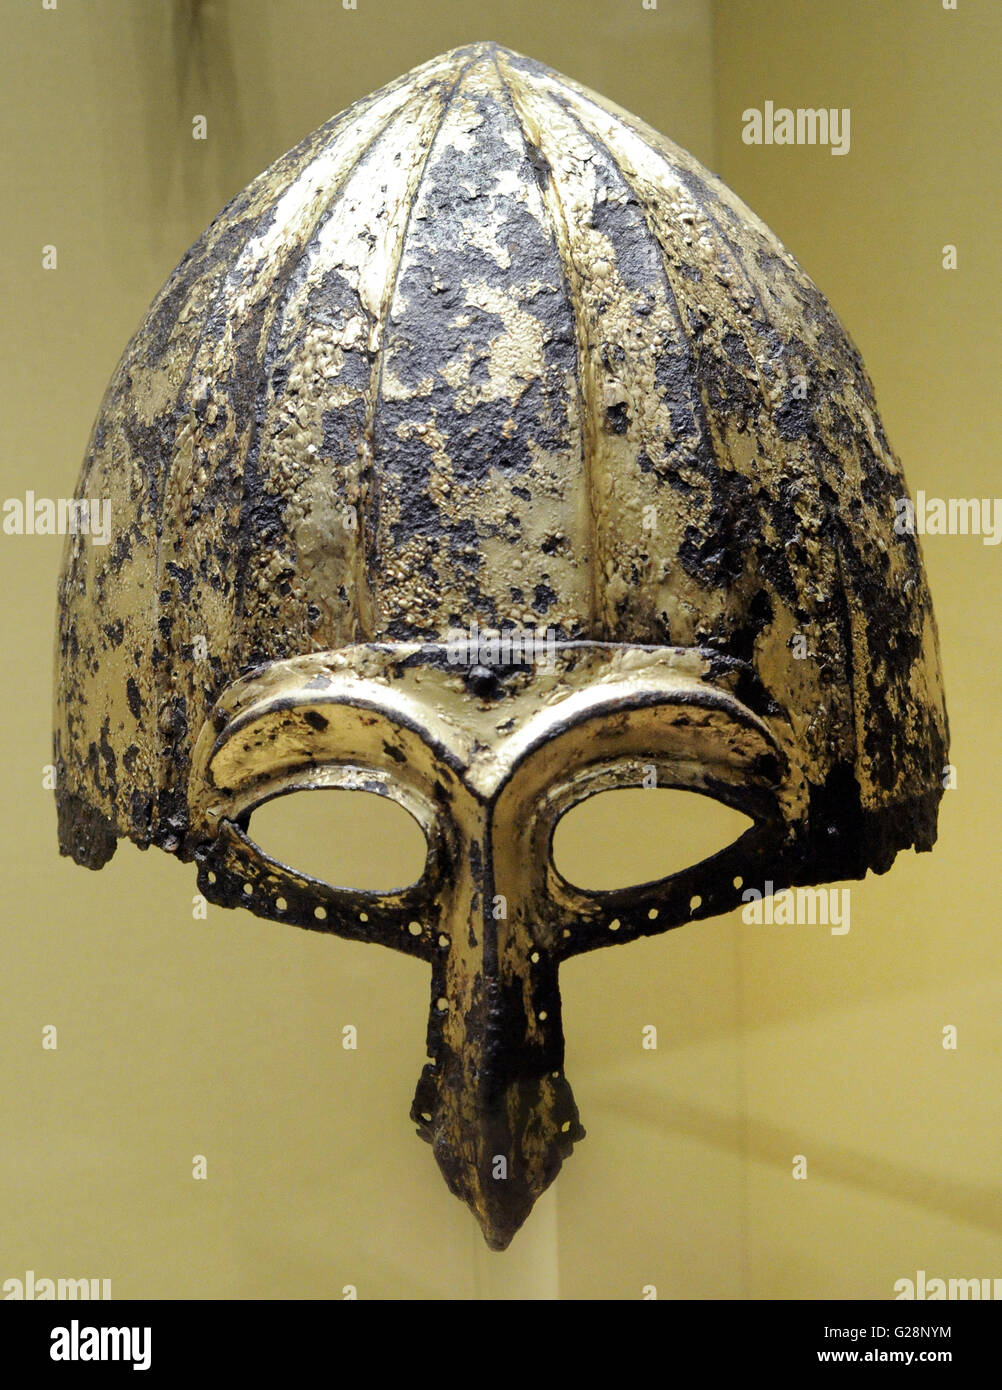 Period of Golden Horde (Ulus Jochi). 13th-14th c. Helmet with a half-mask, eye slits and nose guard. Iron, gilding. The State Hermitage Museum. Saint Petersburg. Russia. Stock Photo